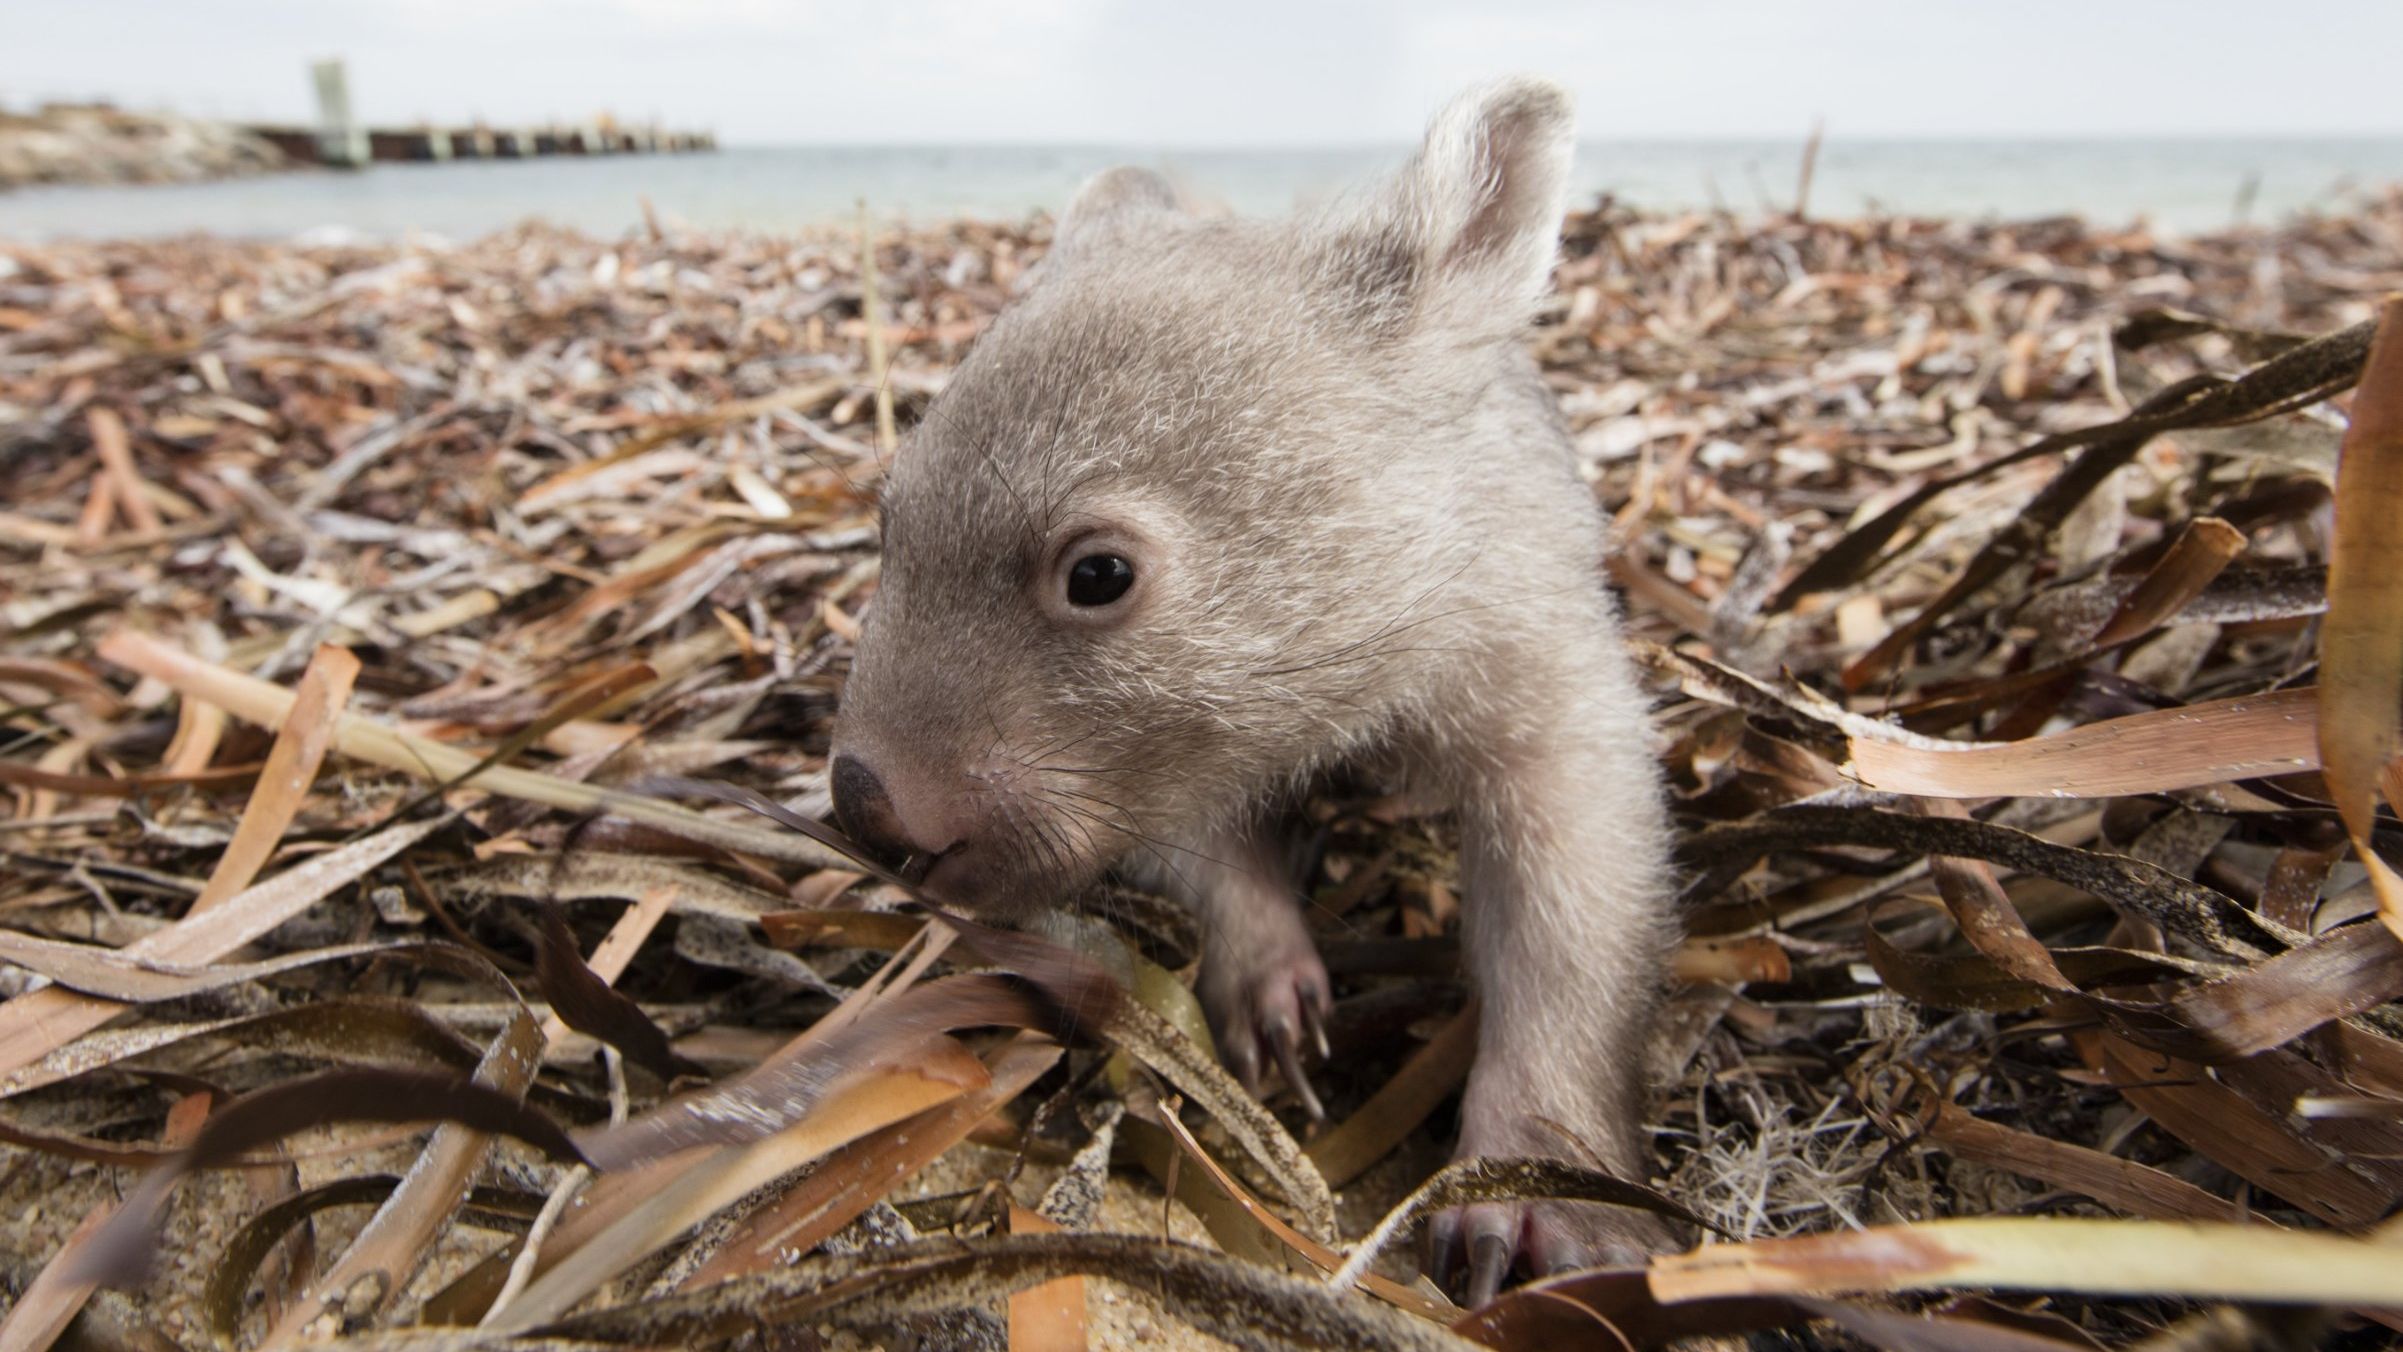 An image of then eight-month old Derek the Wombat who was rescued from his mother's pouch after she was hit by a car in December 2015.